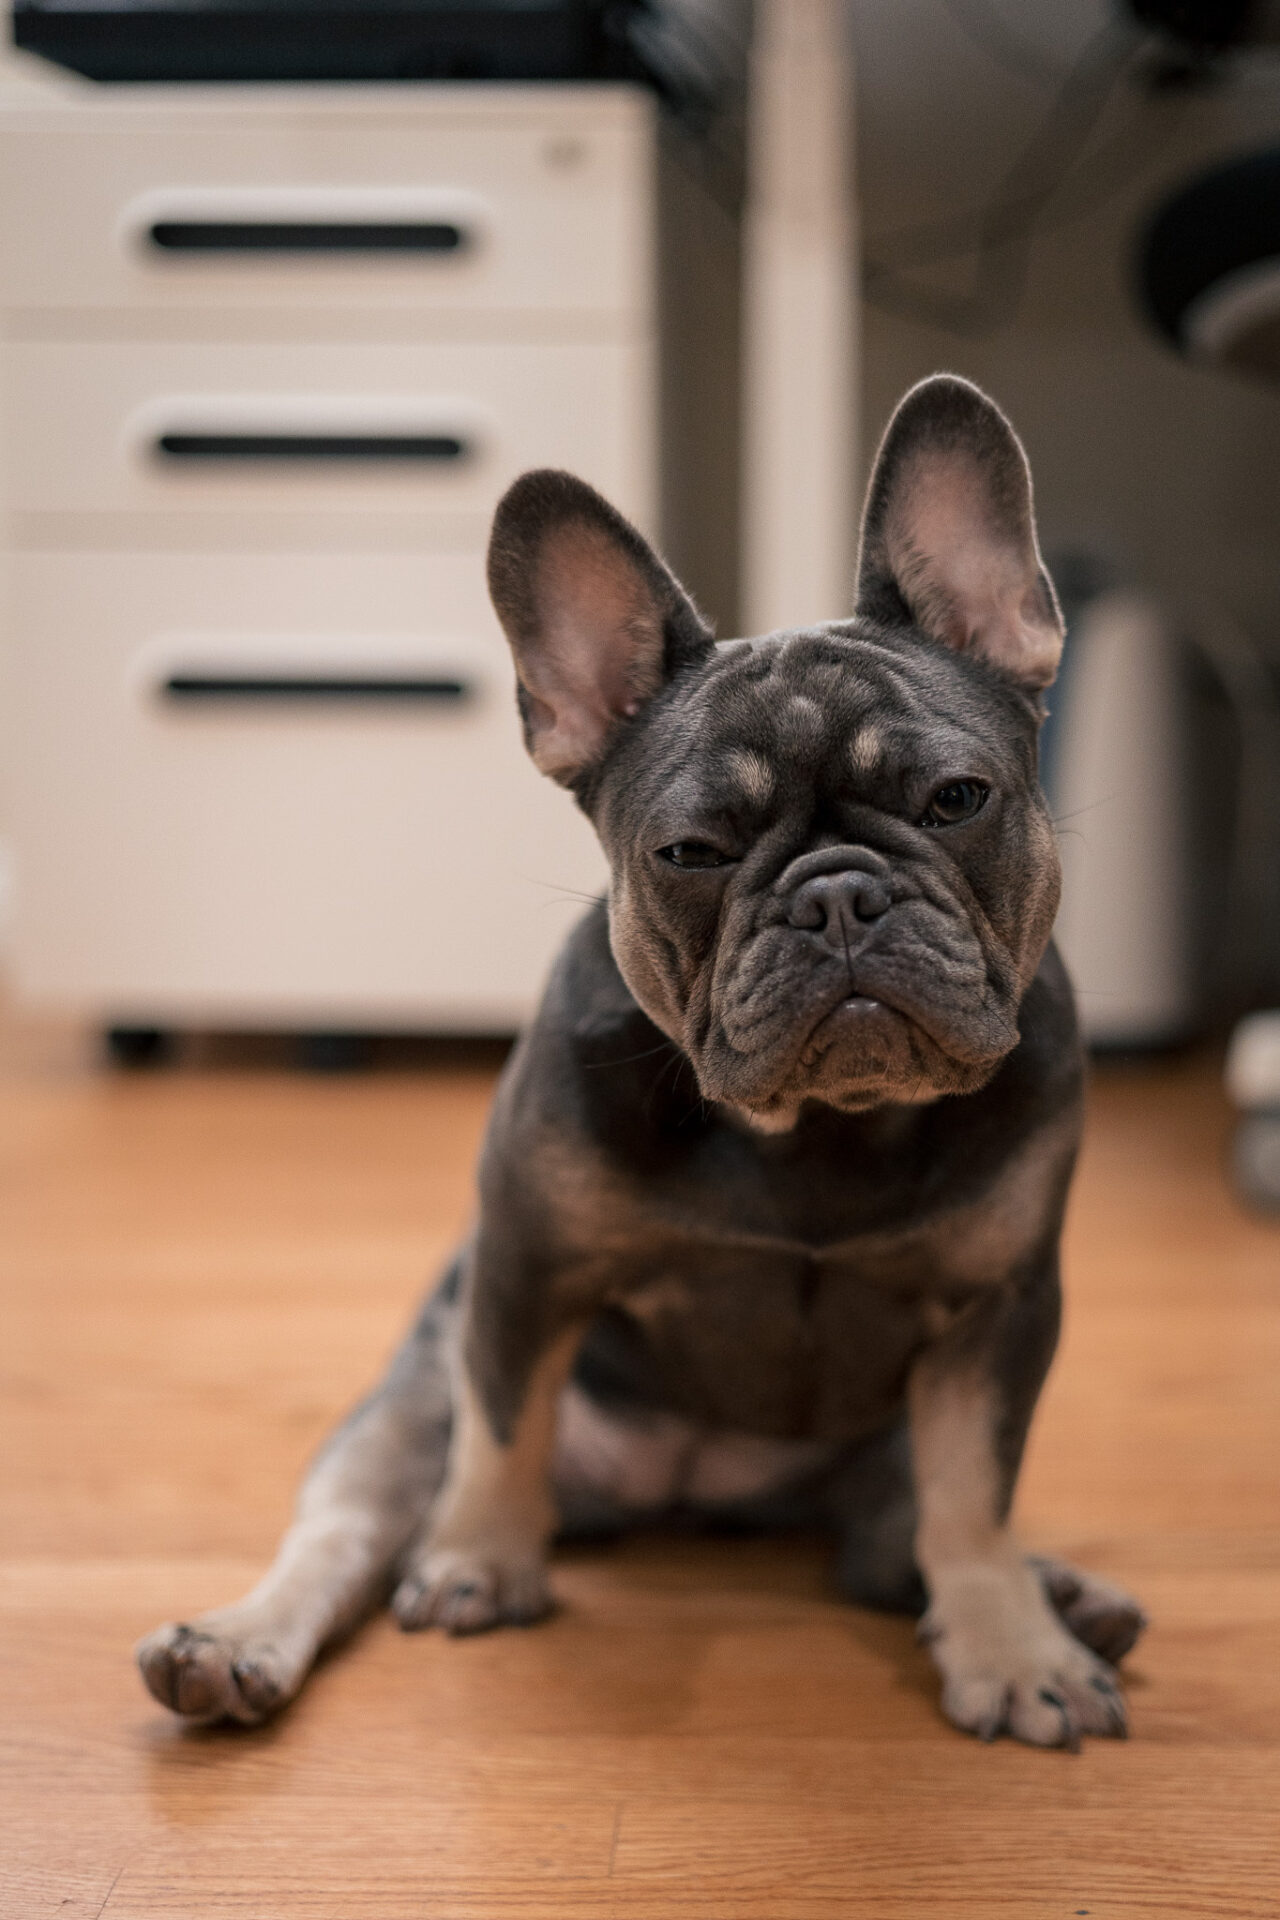 A picture of a french bulldog sitting down like a human squinting at the camera in a super cute way